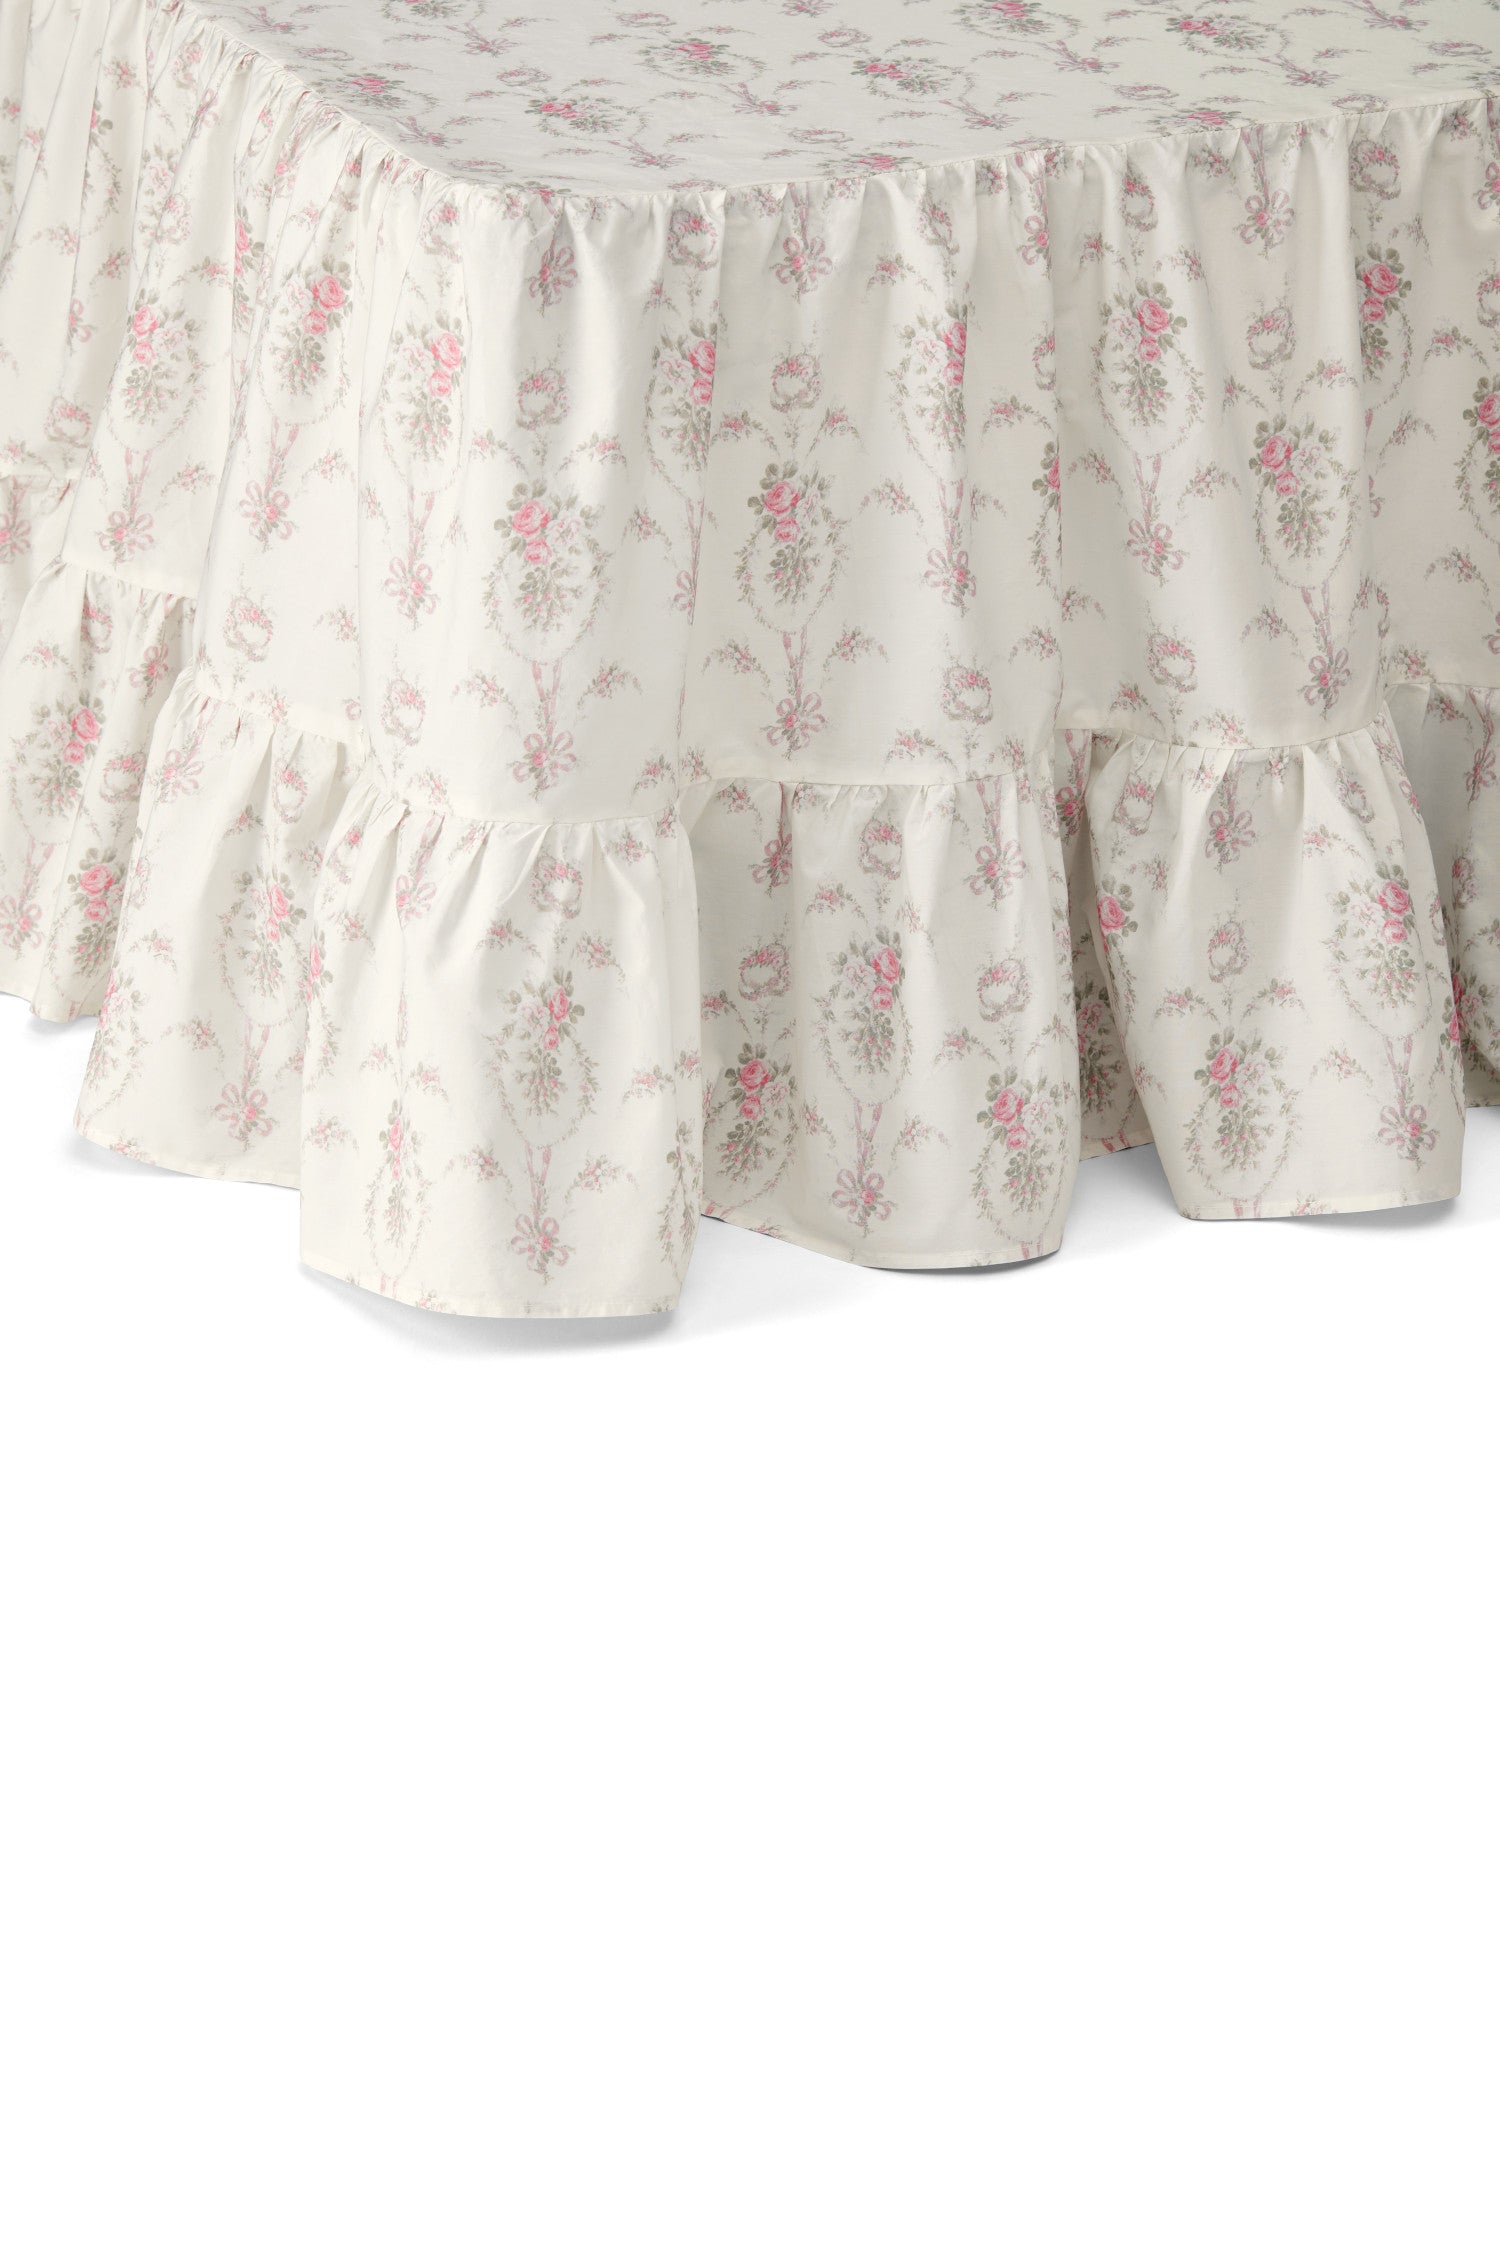 Pink floral ruffle bed skirt